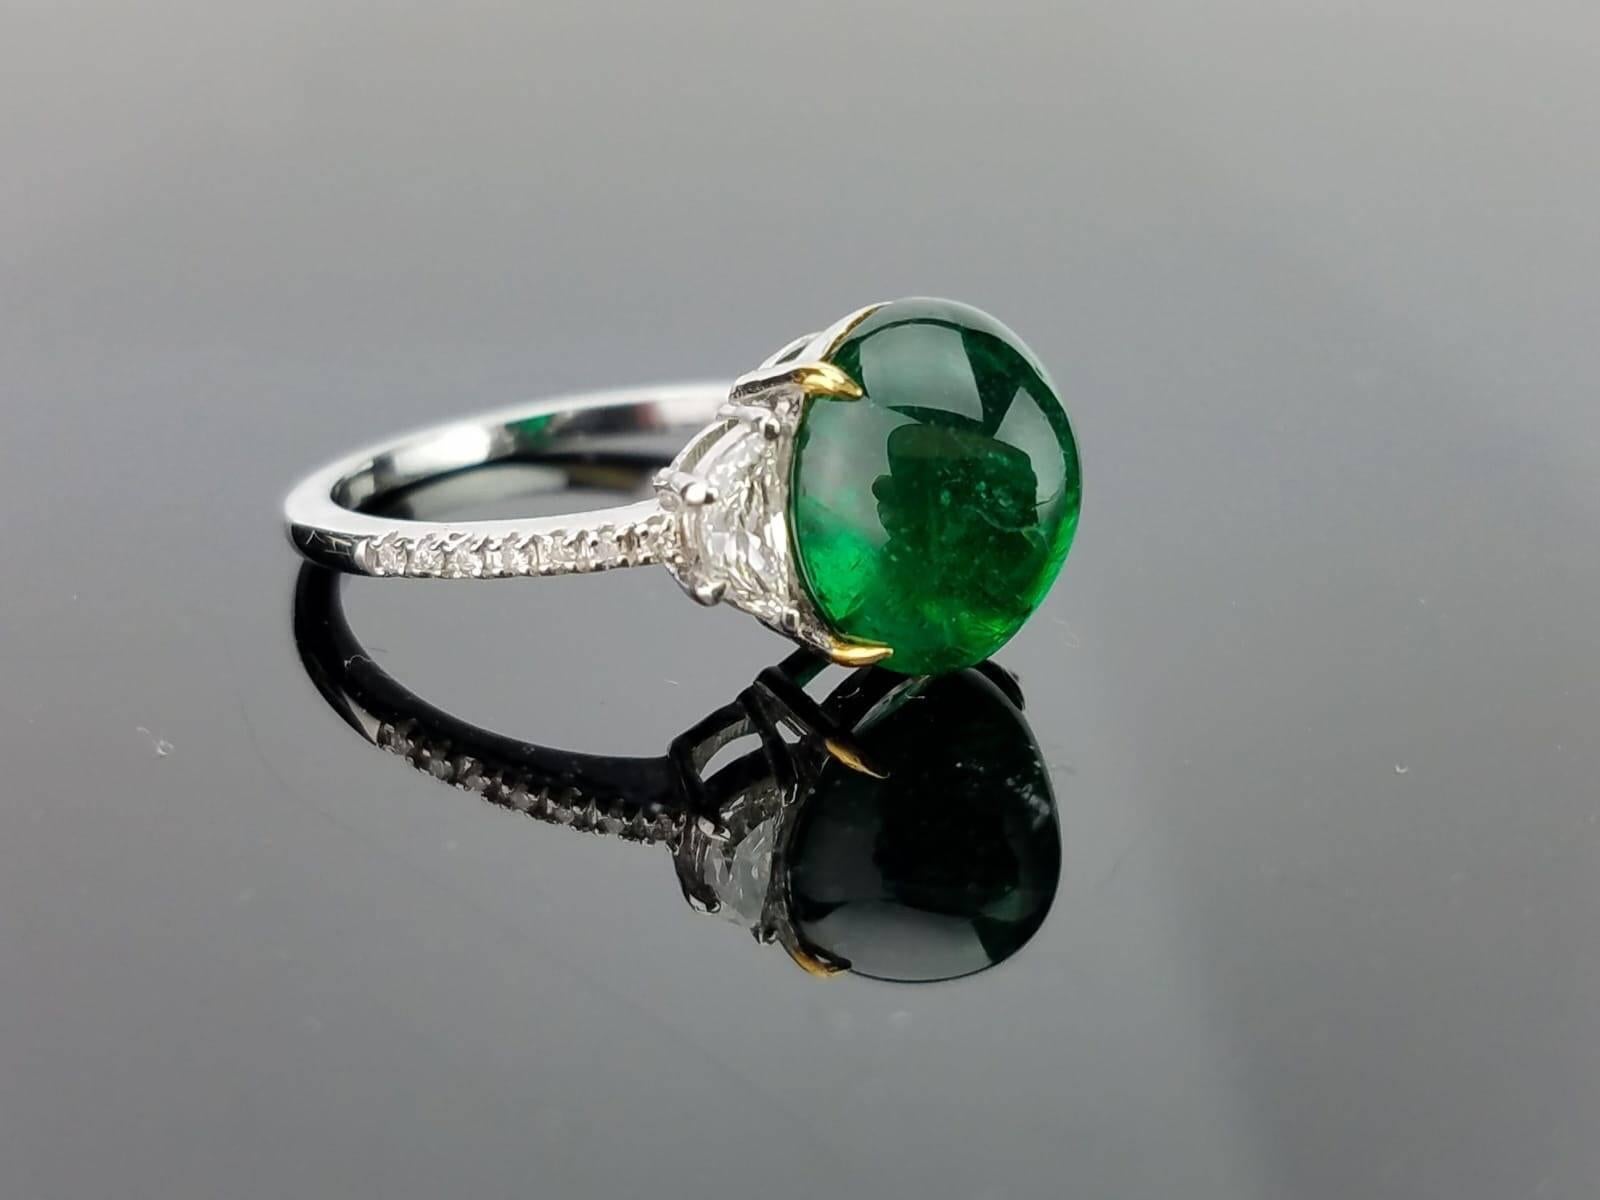 A classic three stone ring, with a 4.80 carat lustrous and deep coloured Zambian Emerald cabochon centre stone and 2 half-moon side stone diamonds. Currently a ring size US 6, but we can resize the ring for you without additional cost. Can be